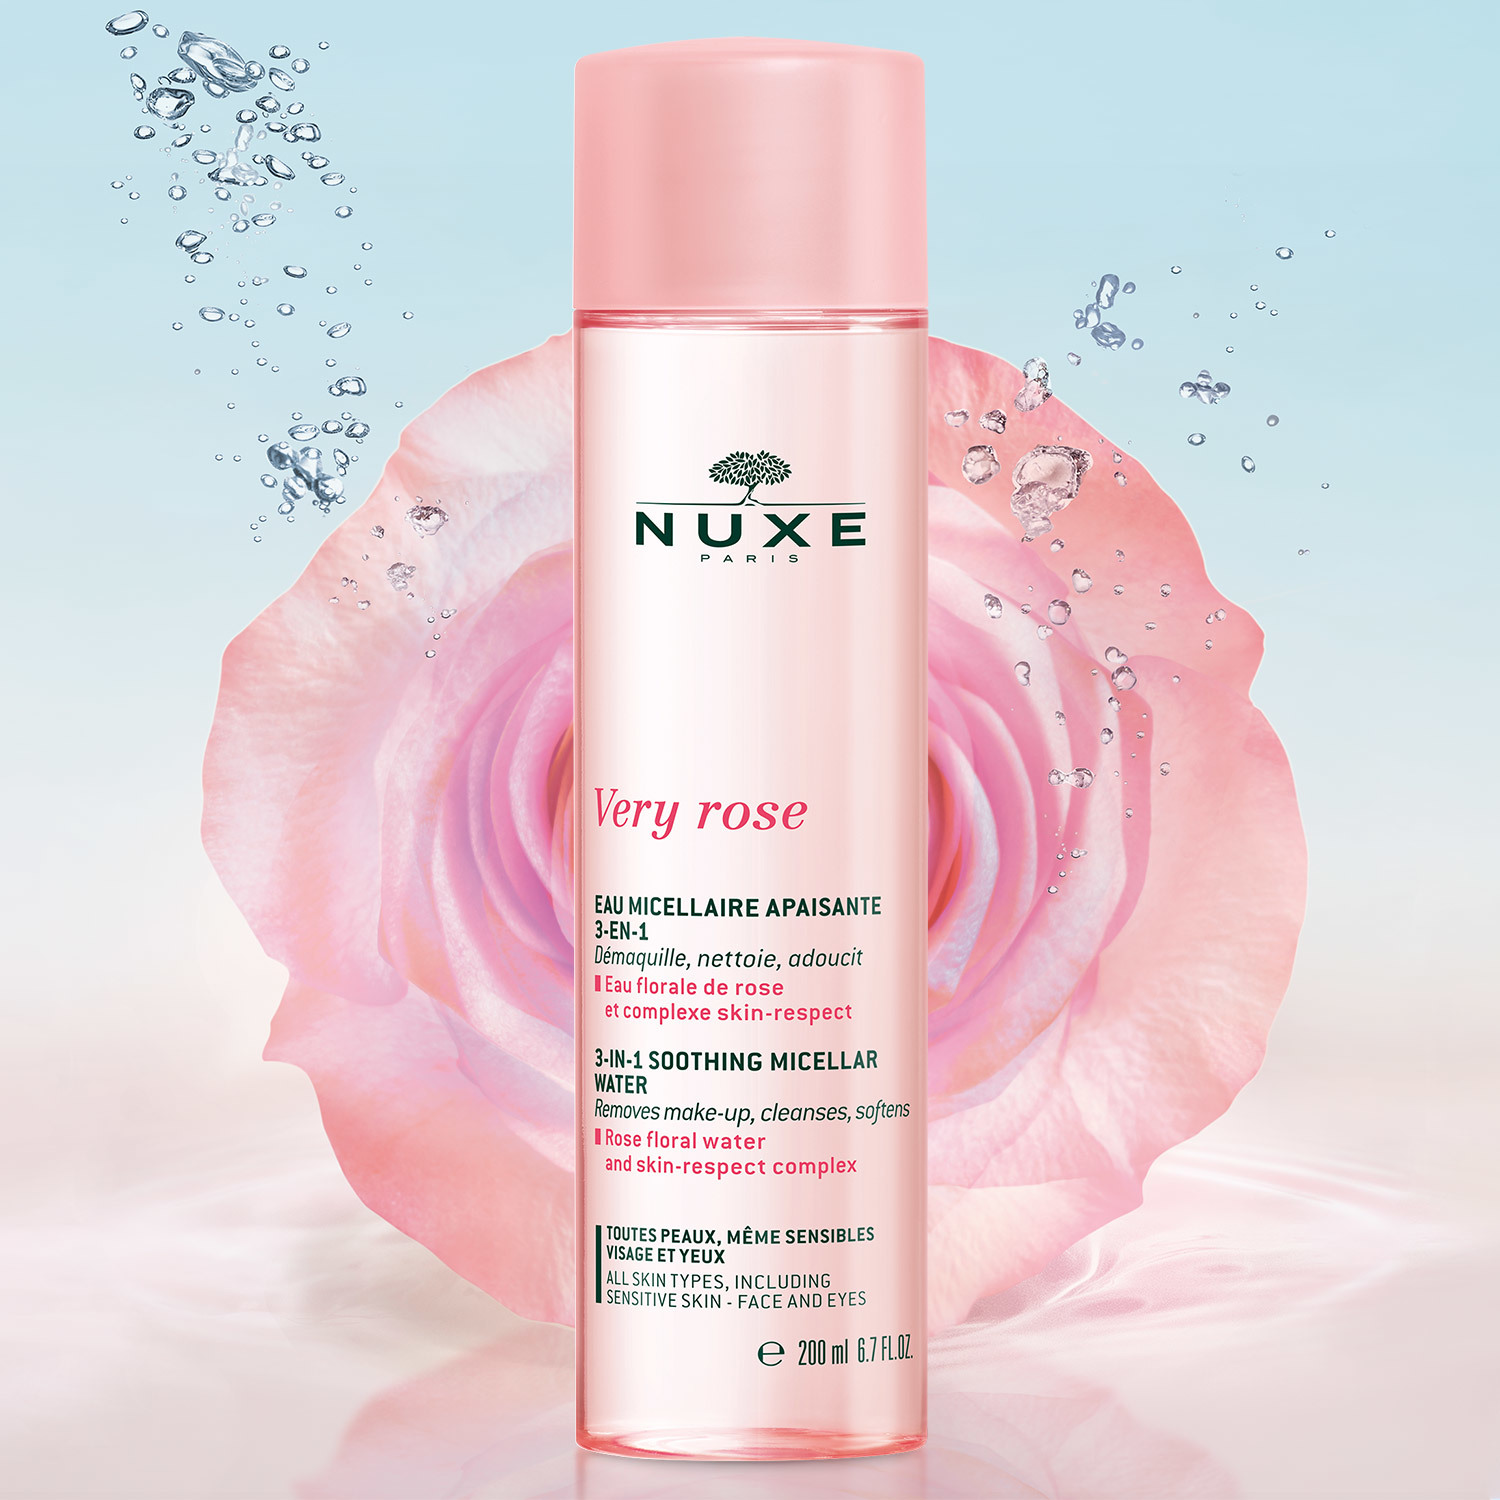 NUXE - Very Rose - Eau Micellaire Apaisante 3-in-1, 200ml